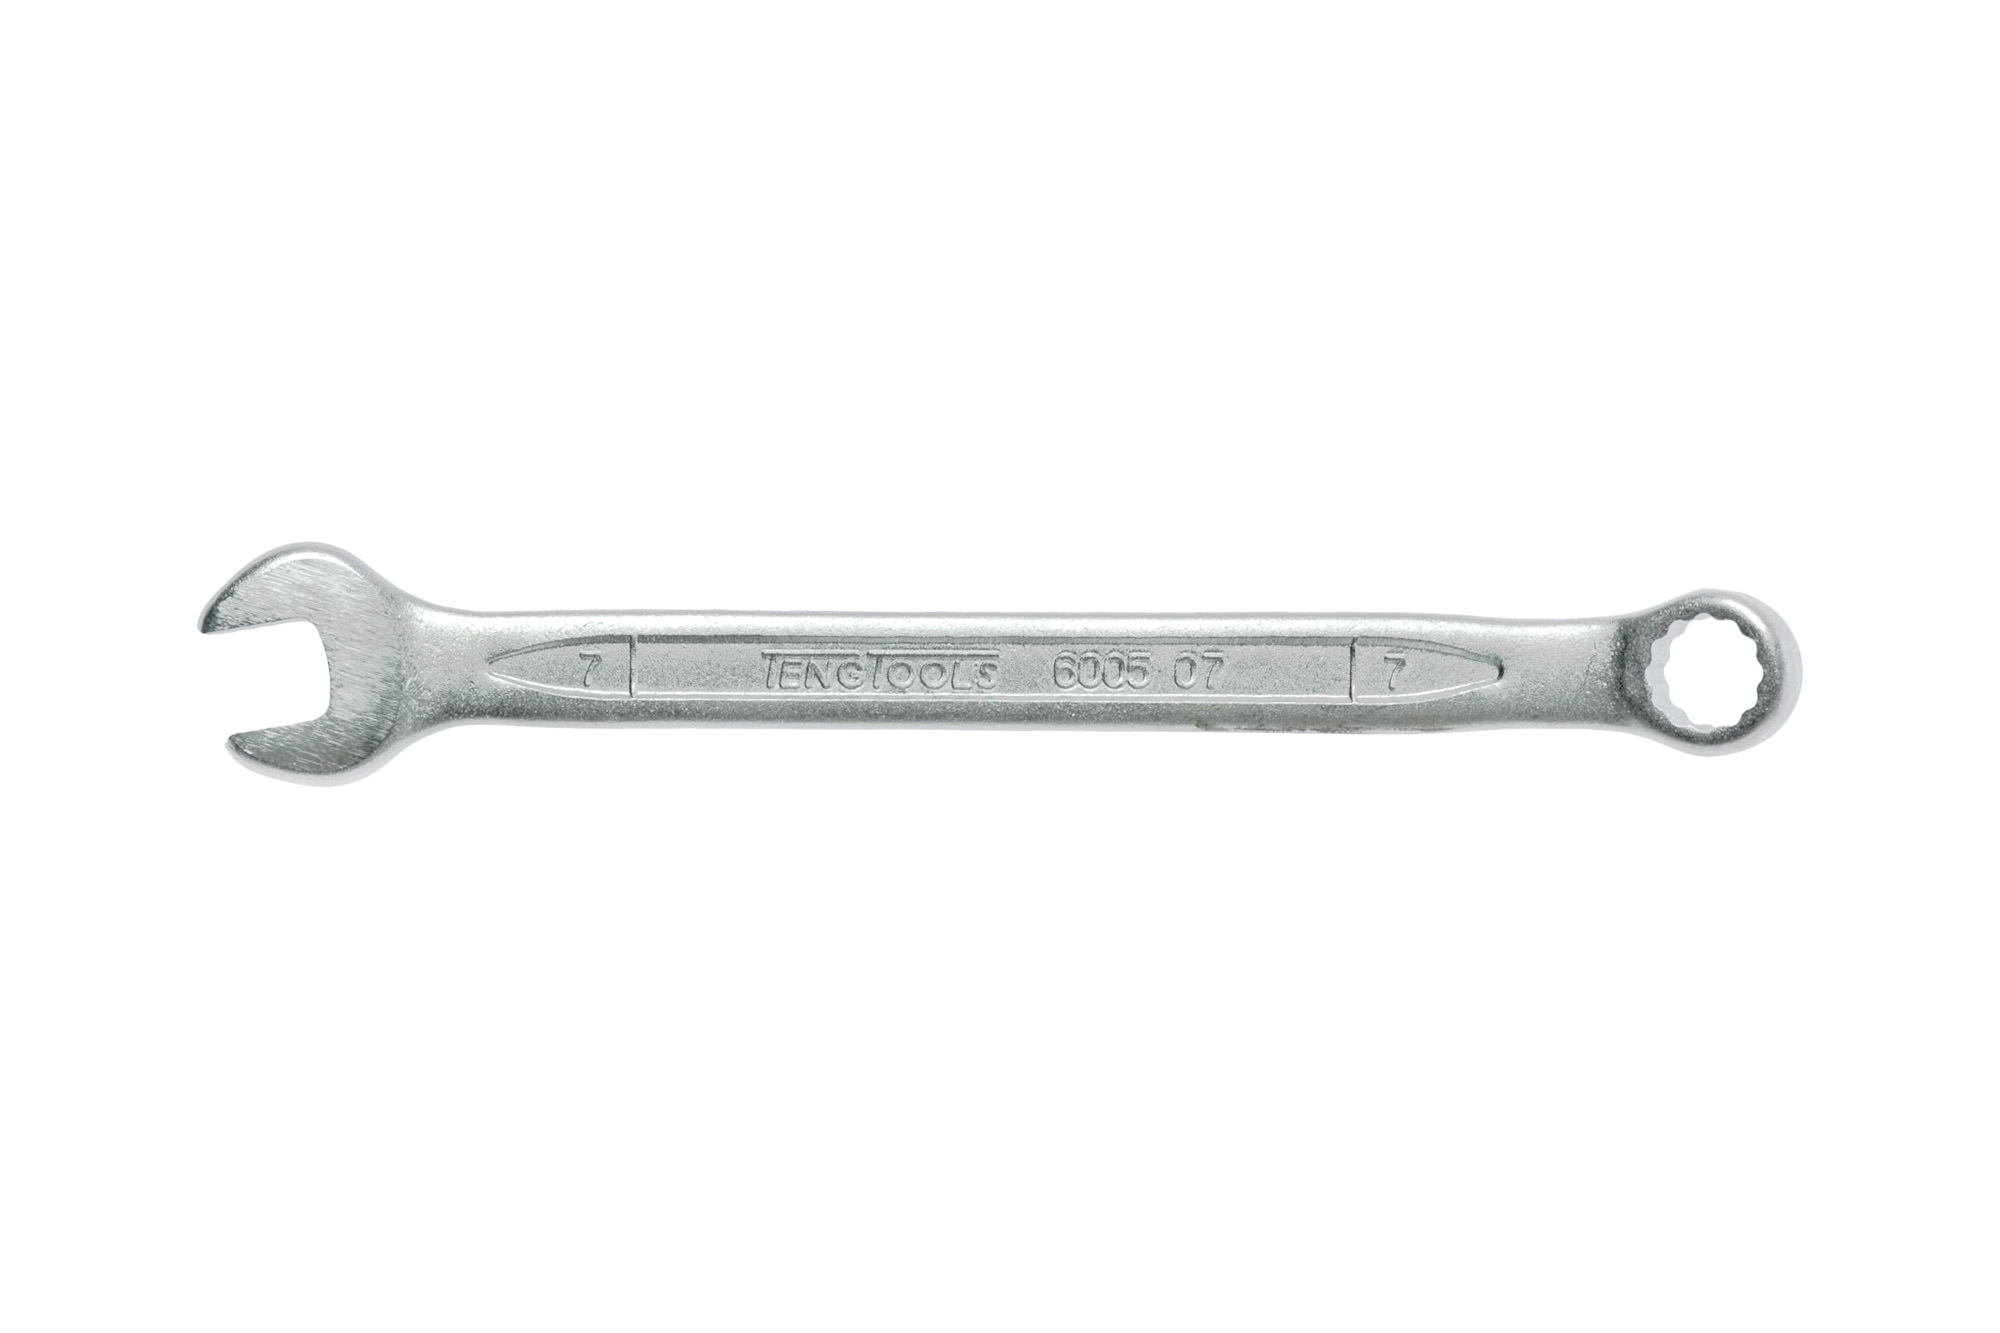 Teng Tools 7mm Metric Combination Wrench - 600507